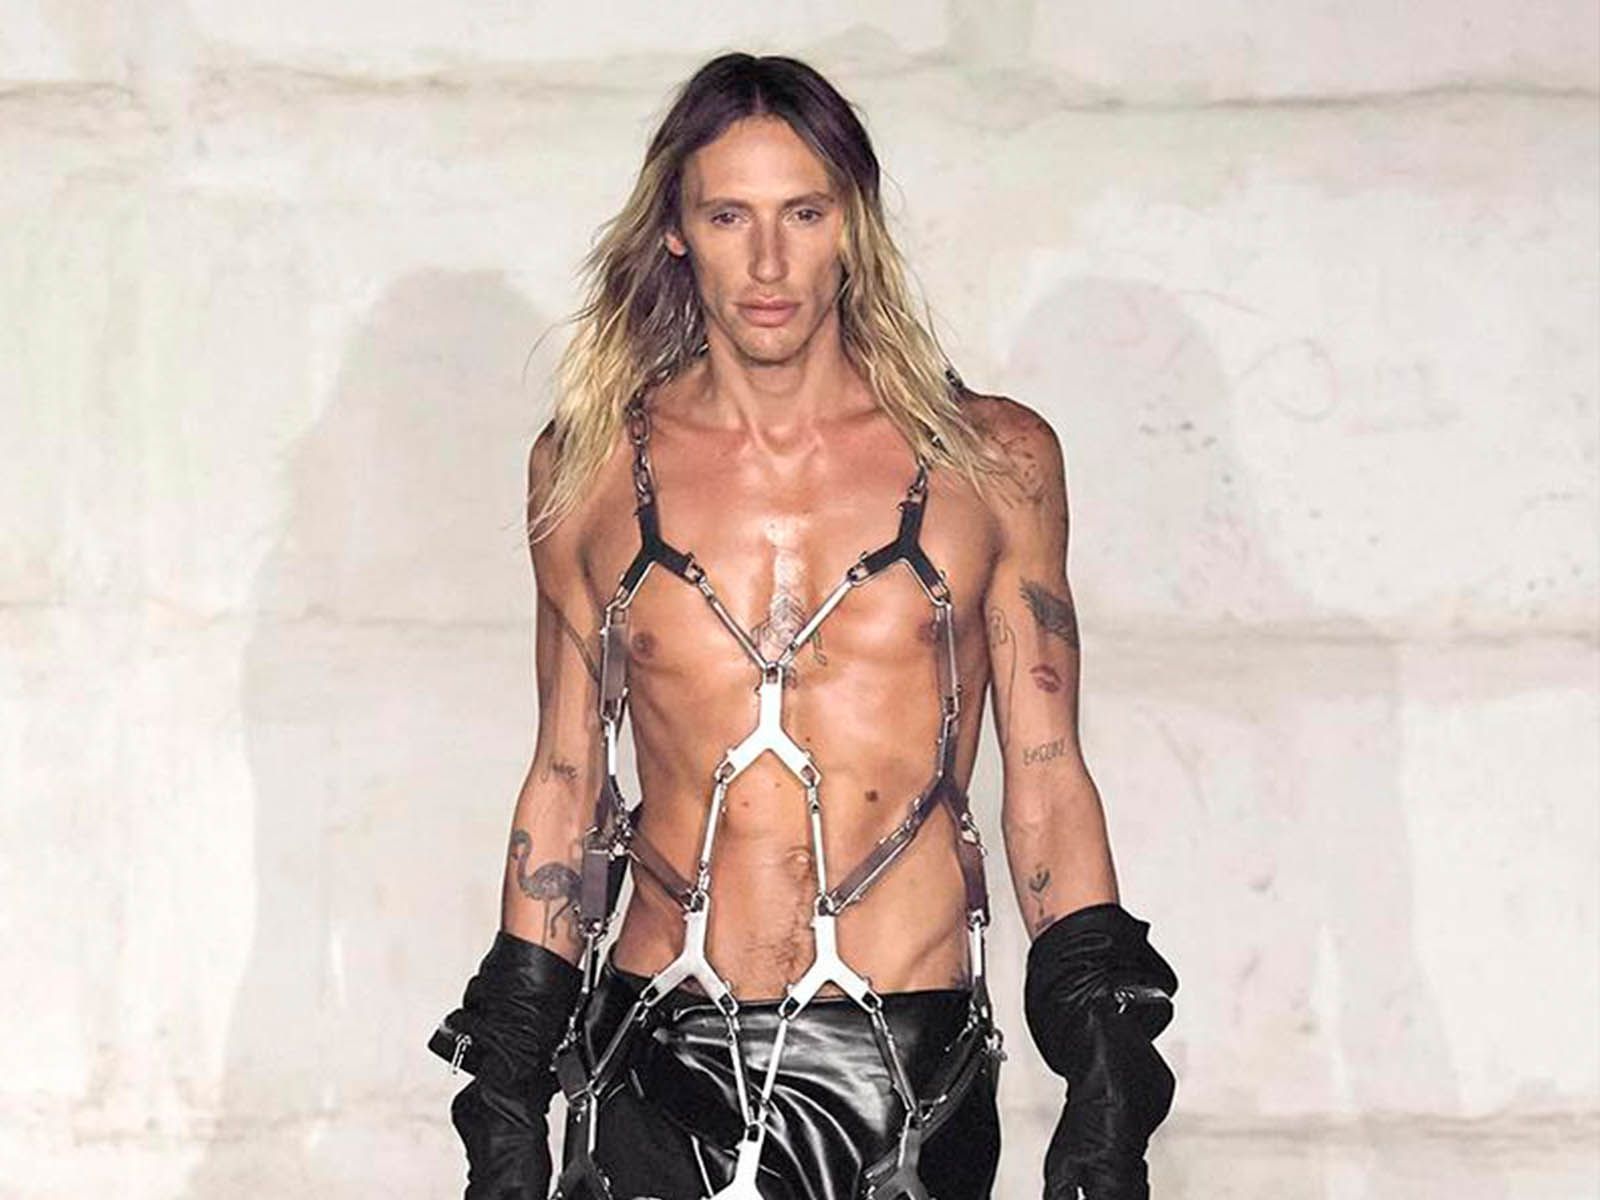 This is the latest on-trend piece from Rick Owens